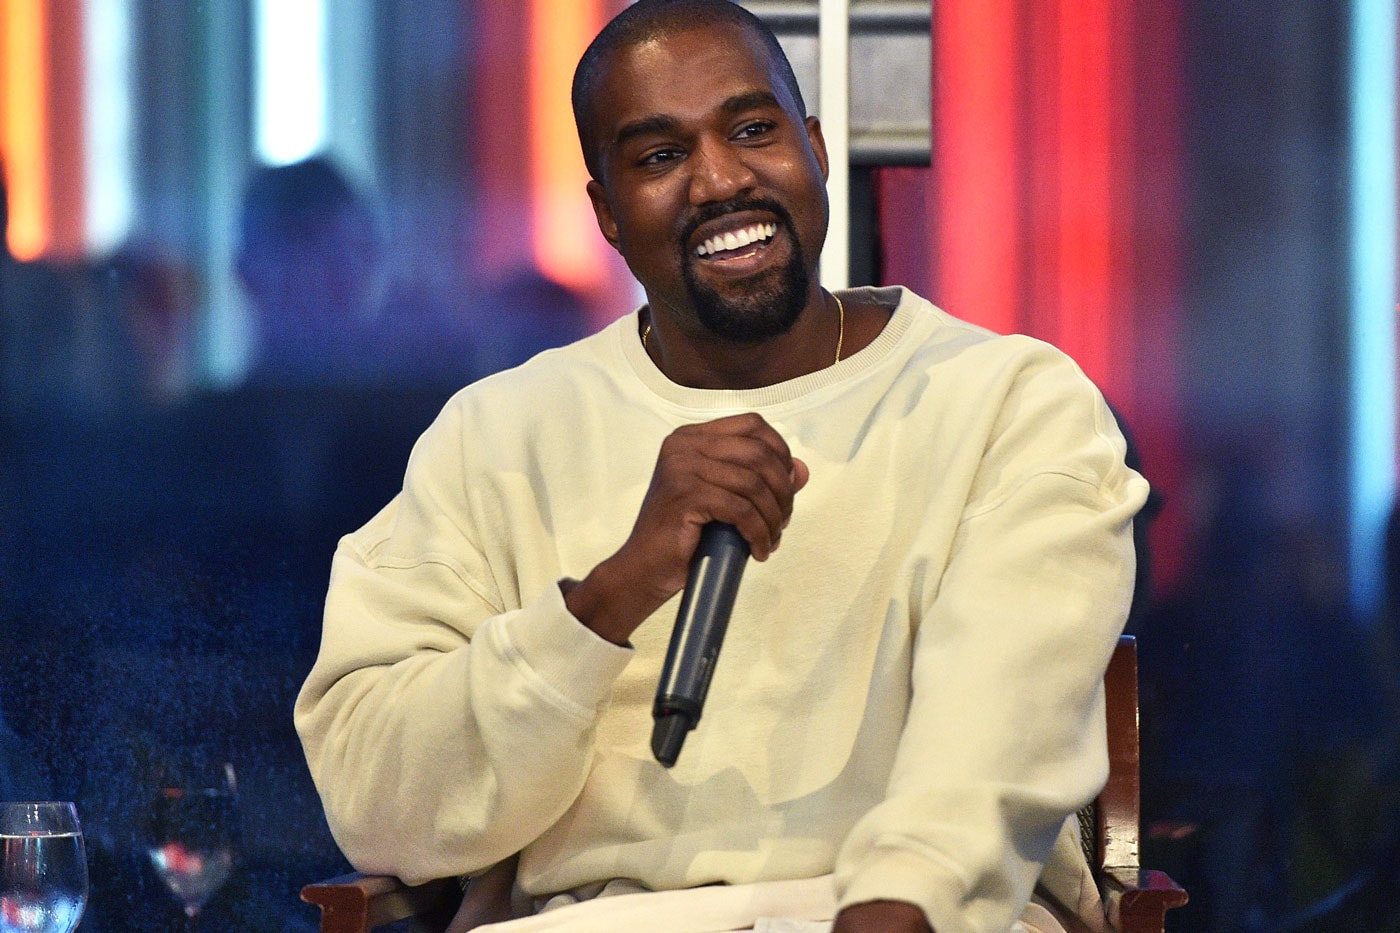 The White House Responds to Kanye West for President